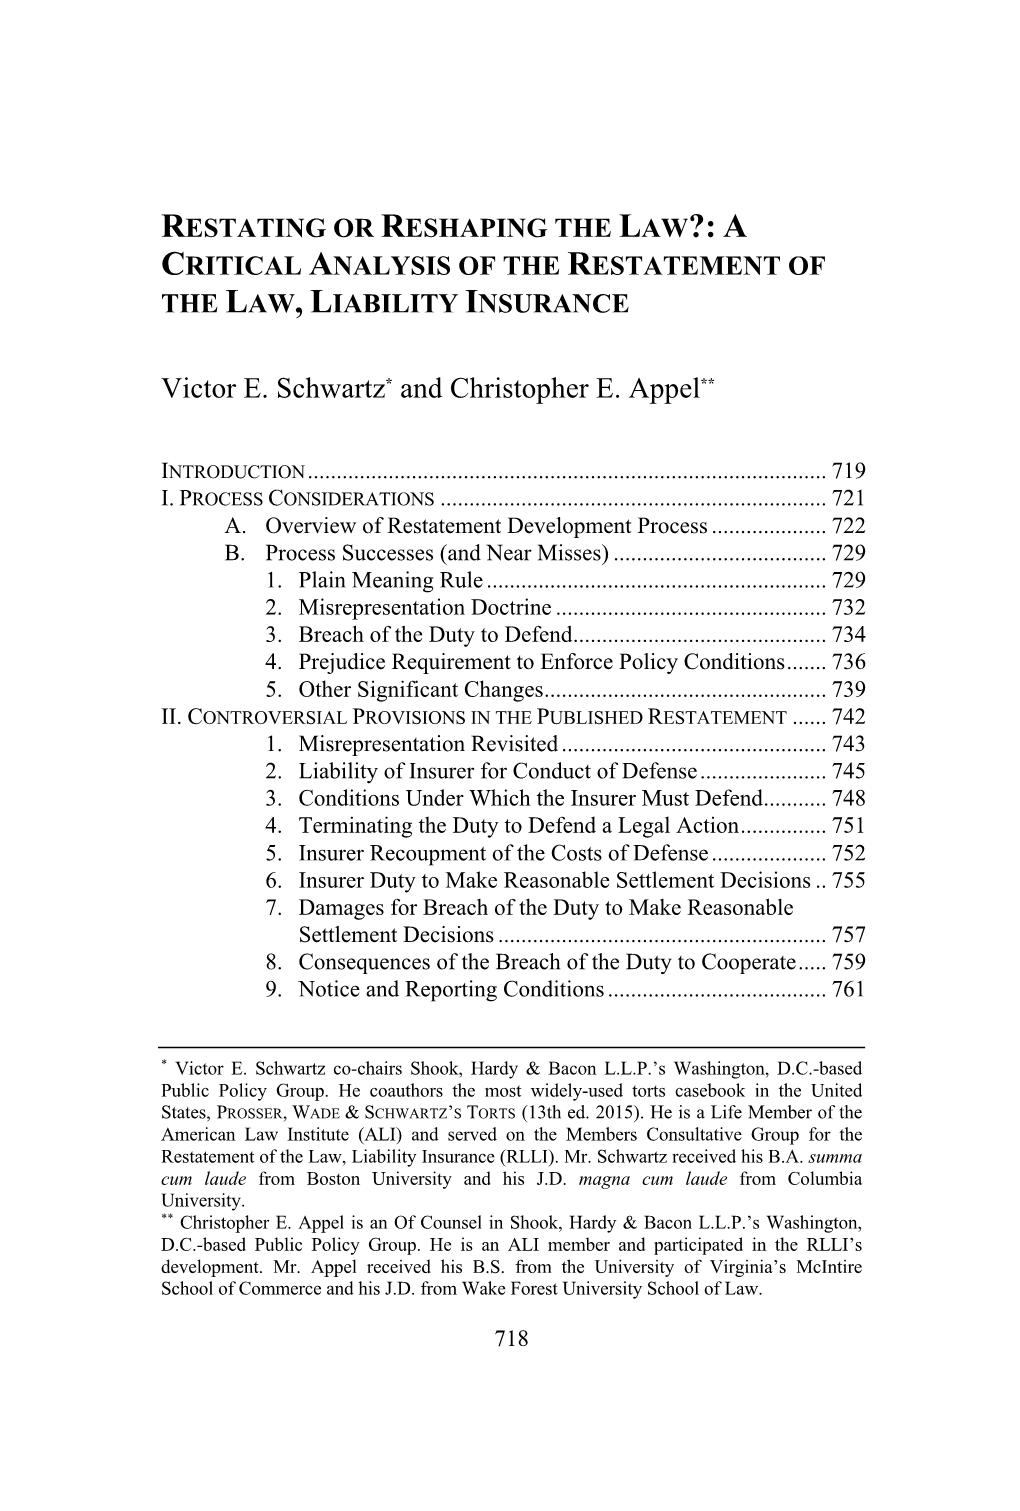 A Critical Analysis of the Restatement of the Law, Liability Insurance